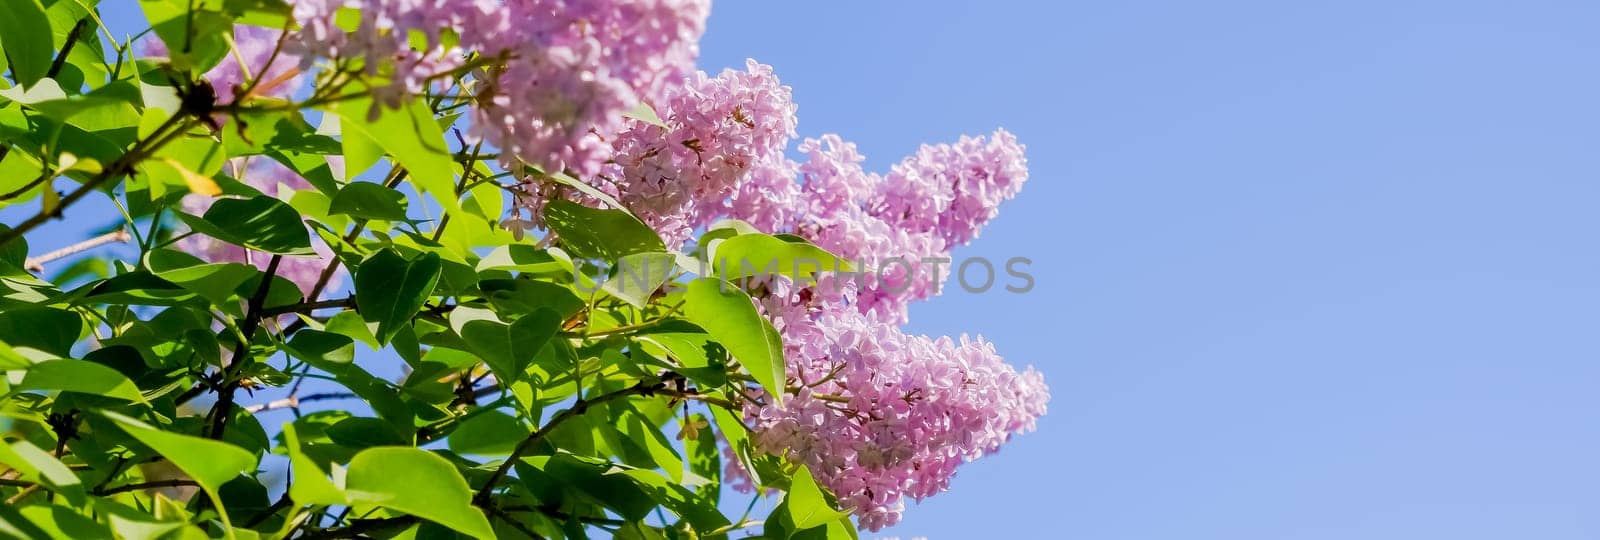 Lilac bush over sky background. Lilac flowers in garden or park. Nature background, banner